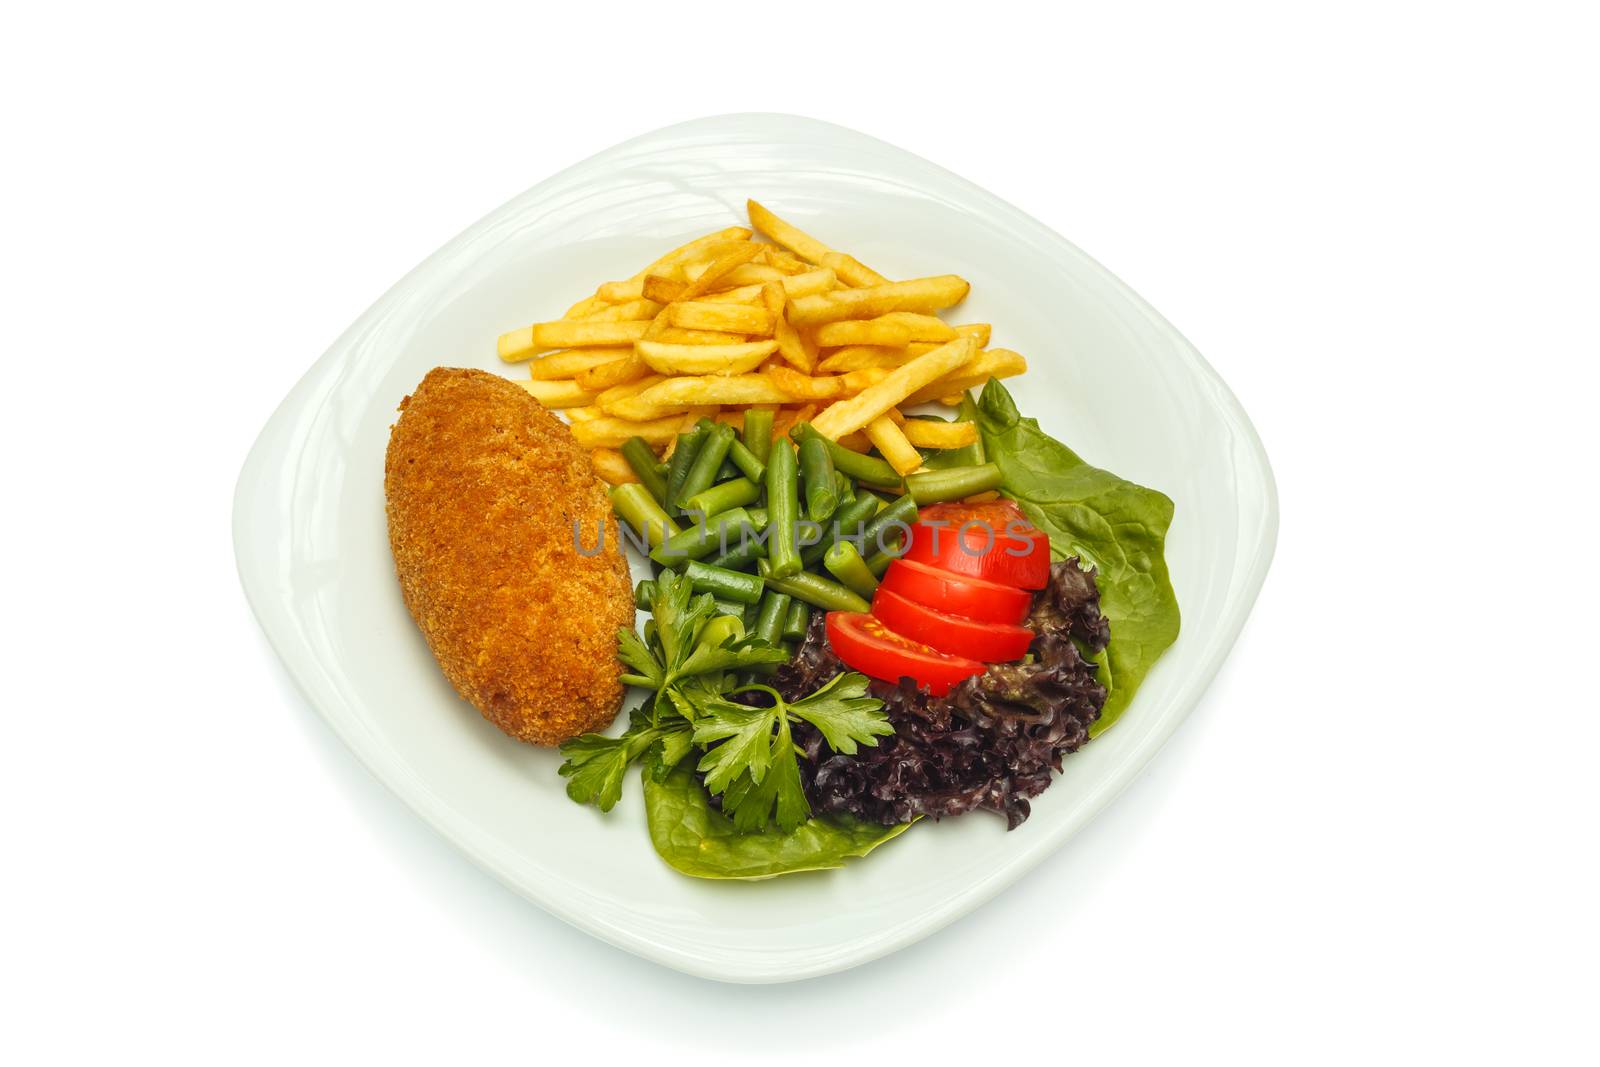 chicken cutlet with vegetables and garnish by fogen